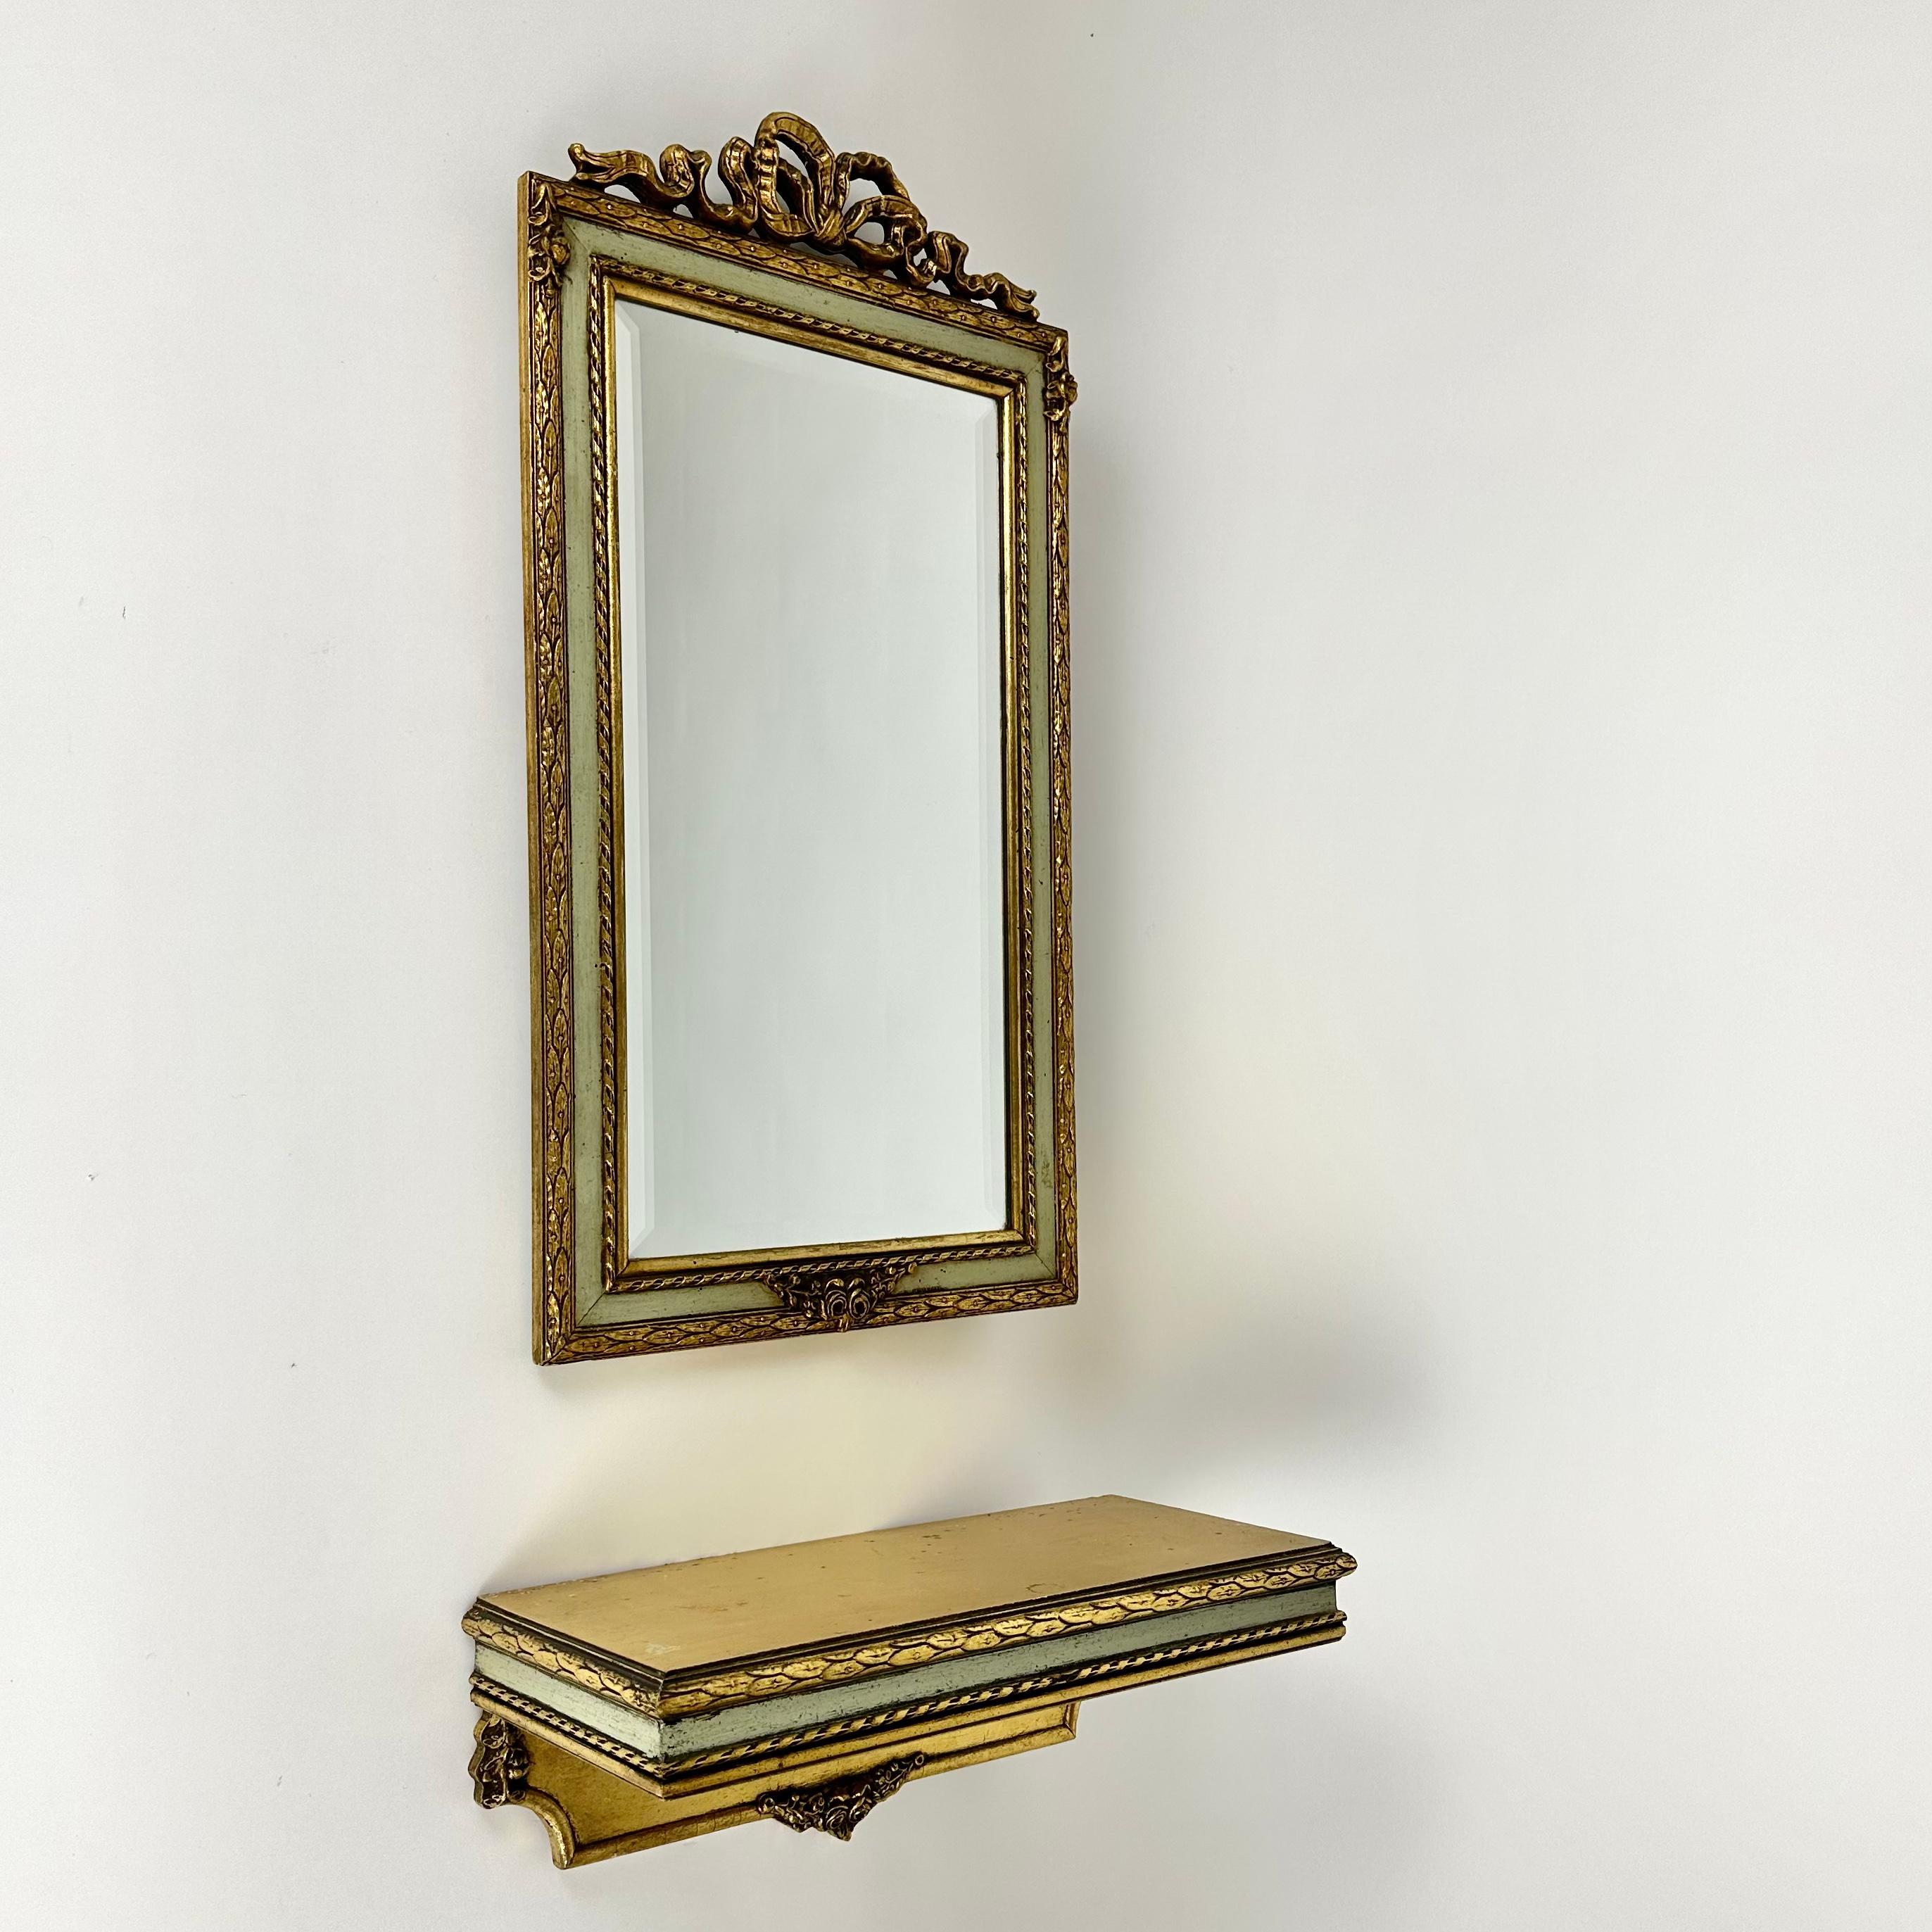 Very beautiful wall mirror in wooden carved frame with gold plated wooden console, Belgium, 1960s.

Hand-carved gilt wooden frame with floral decoration and a ribbon thread on the top centre.

This vintage set has been expertly crafted.

Our